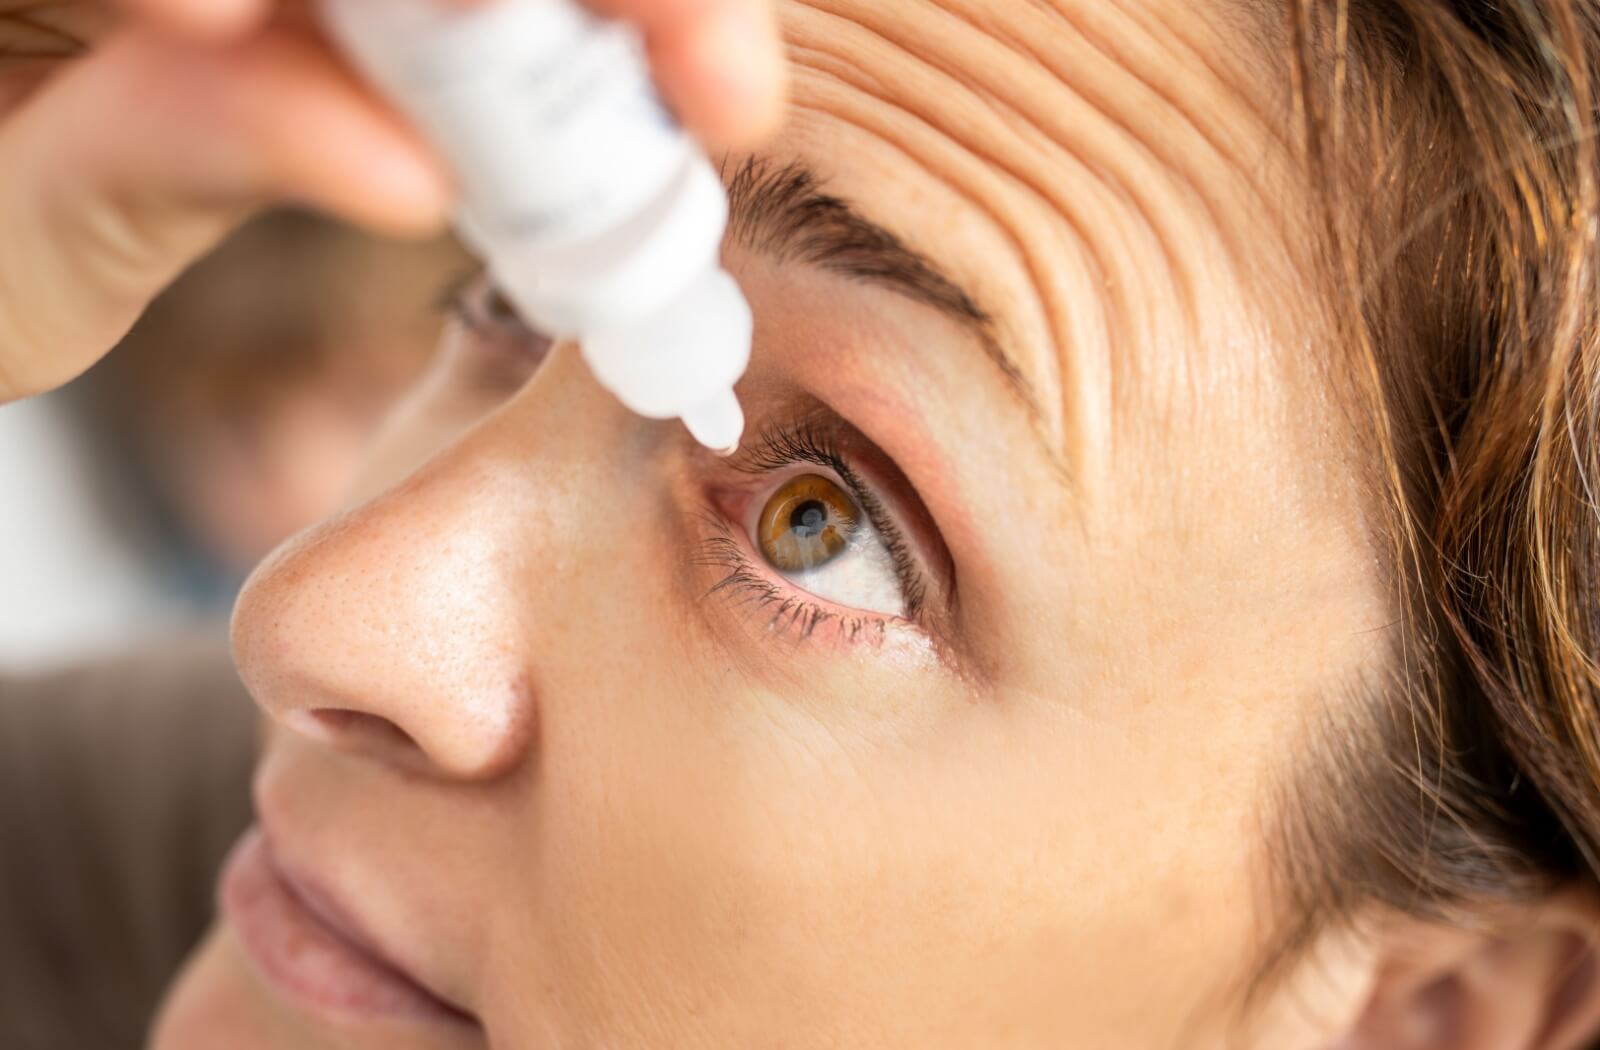 A close-up of a woman applying artificial tears to her left eye.